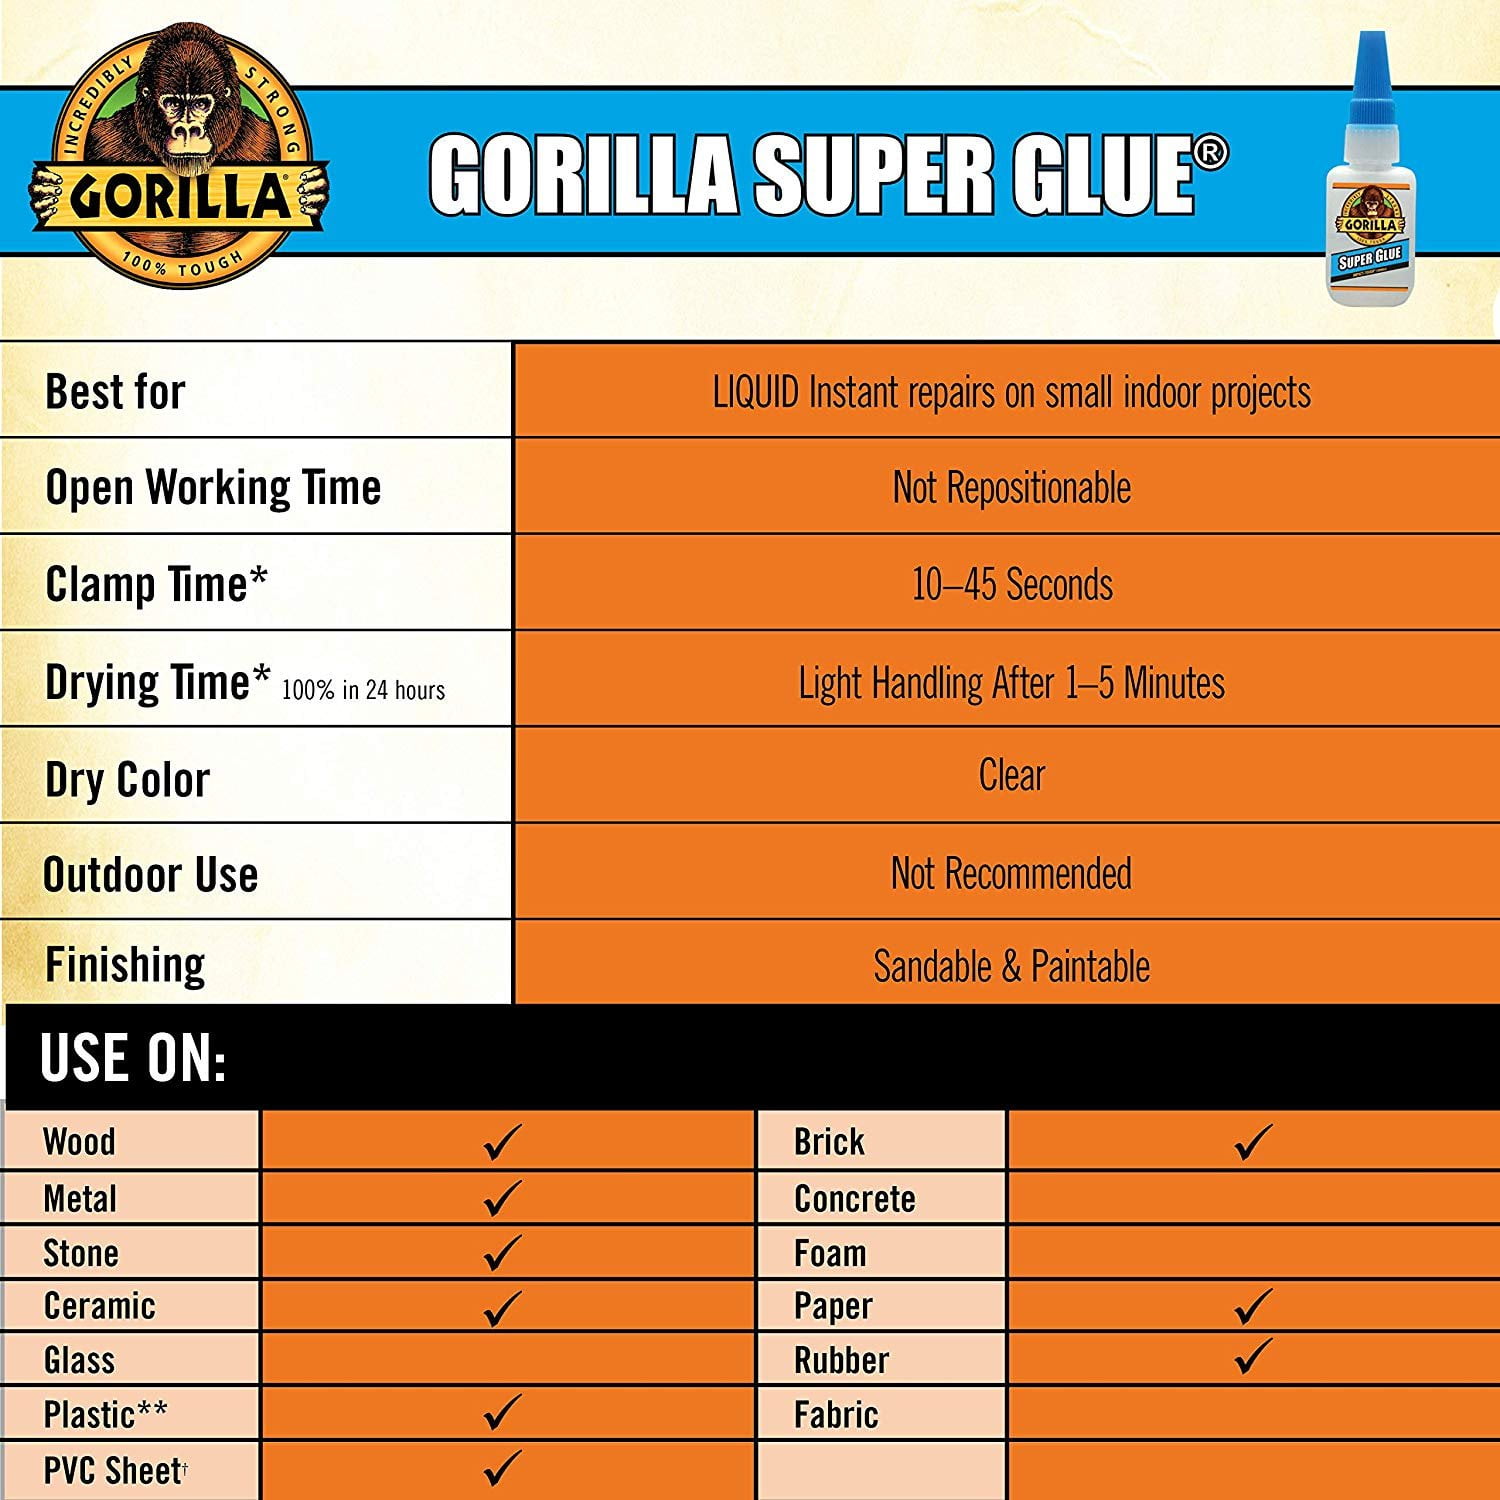 Which of these two brands, Gorilla Super Glue or Krazy Glue, is best for  repairing ceramic plates and cups? - Quora